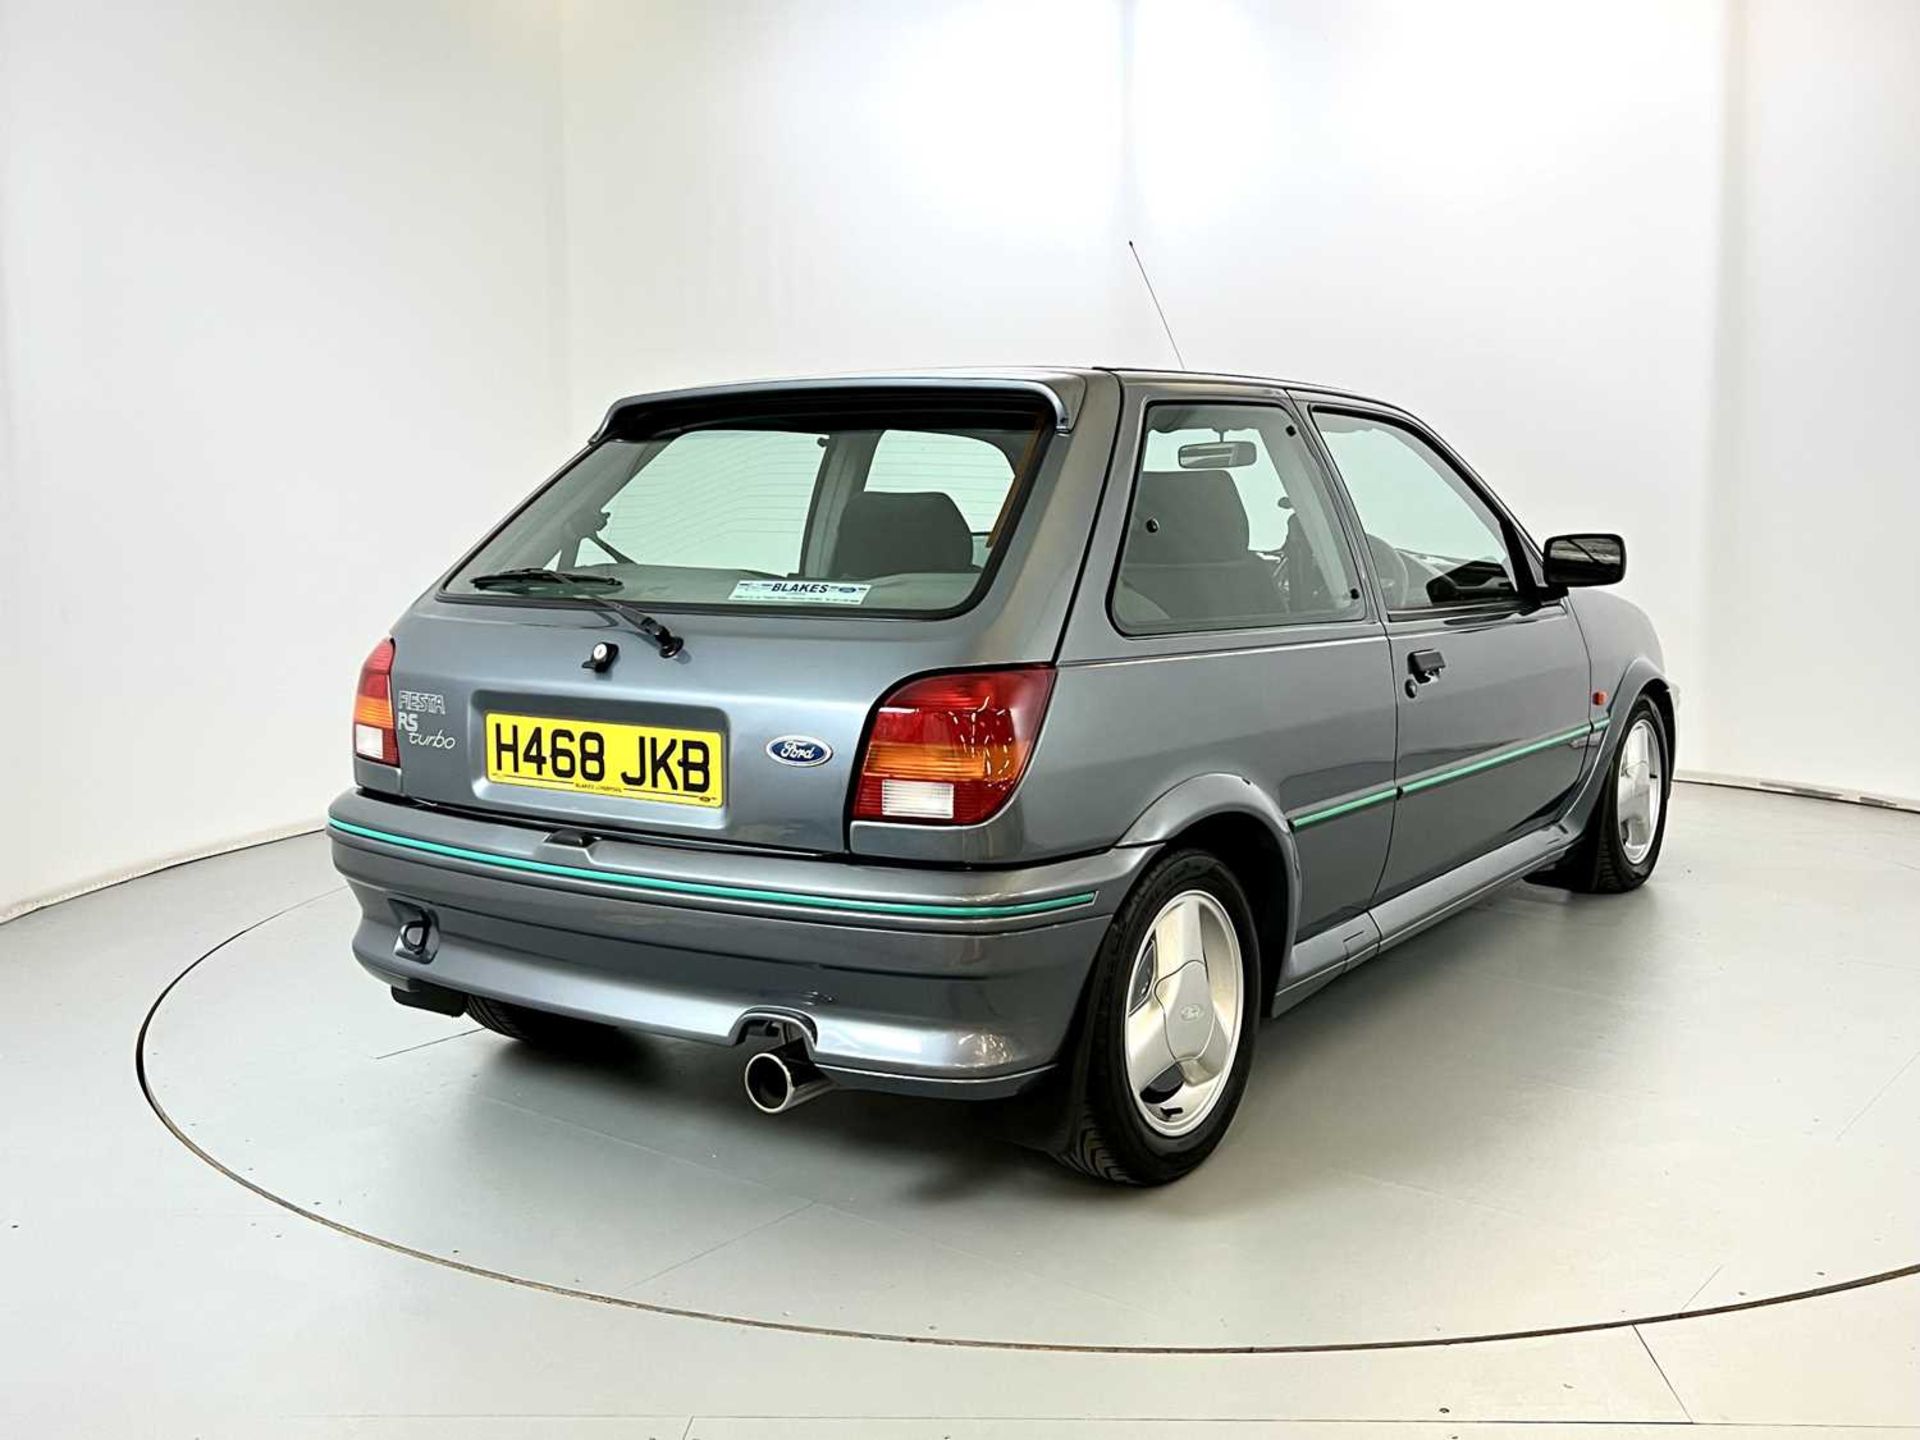 1991 Ford Fiesta RS Turbo - Image 9 of 32